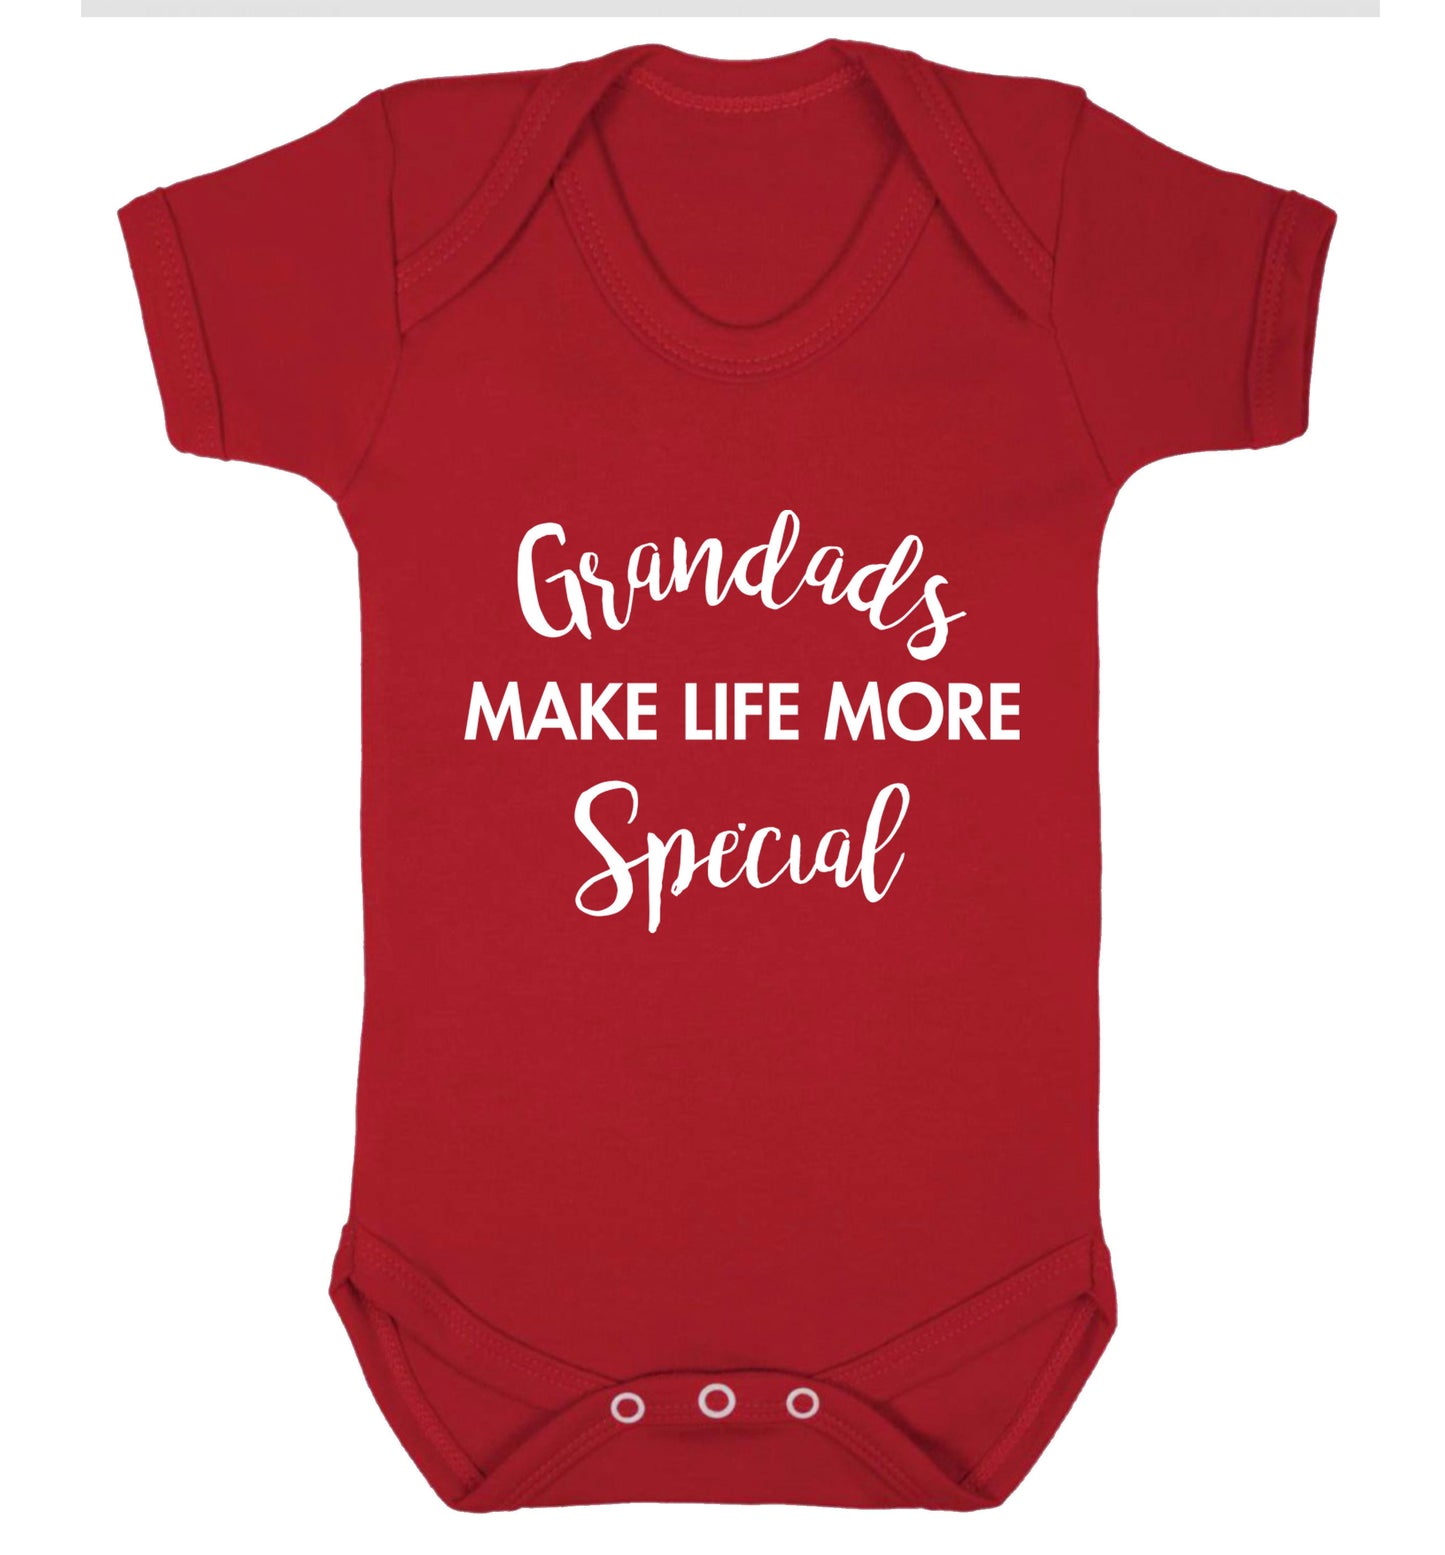 Grandads make life more special Baby Vest red 18-24 months